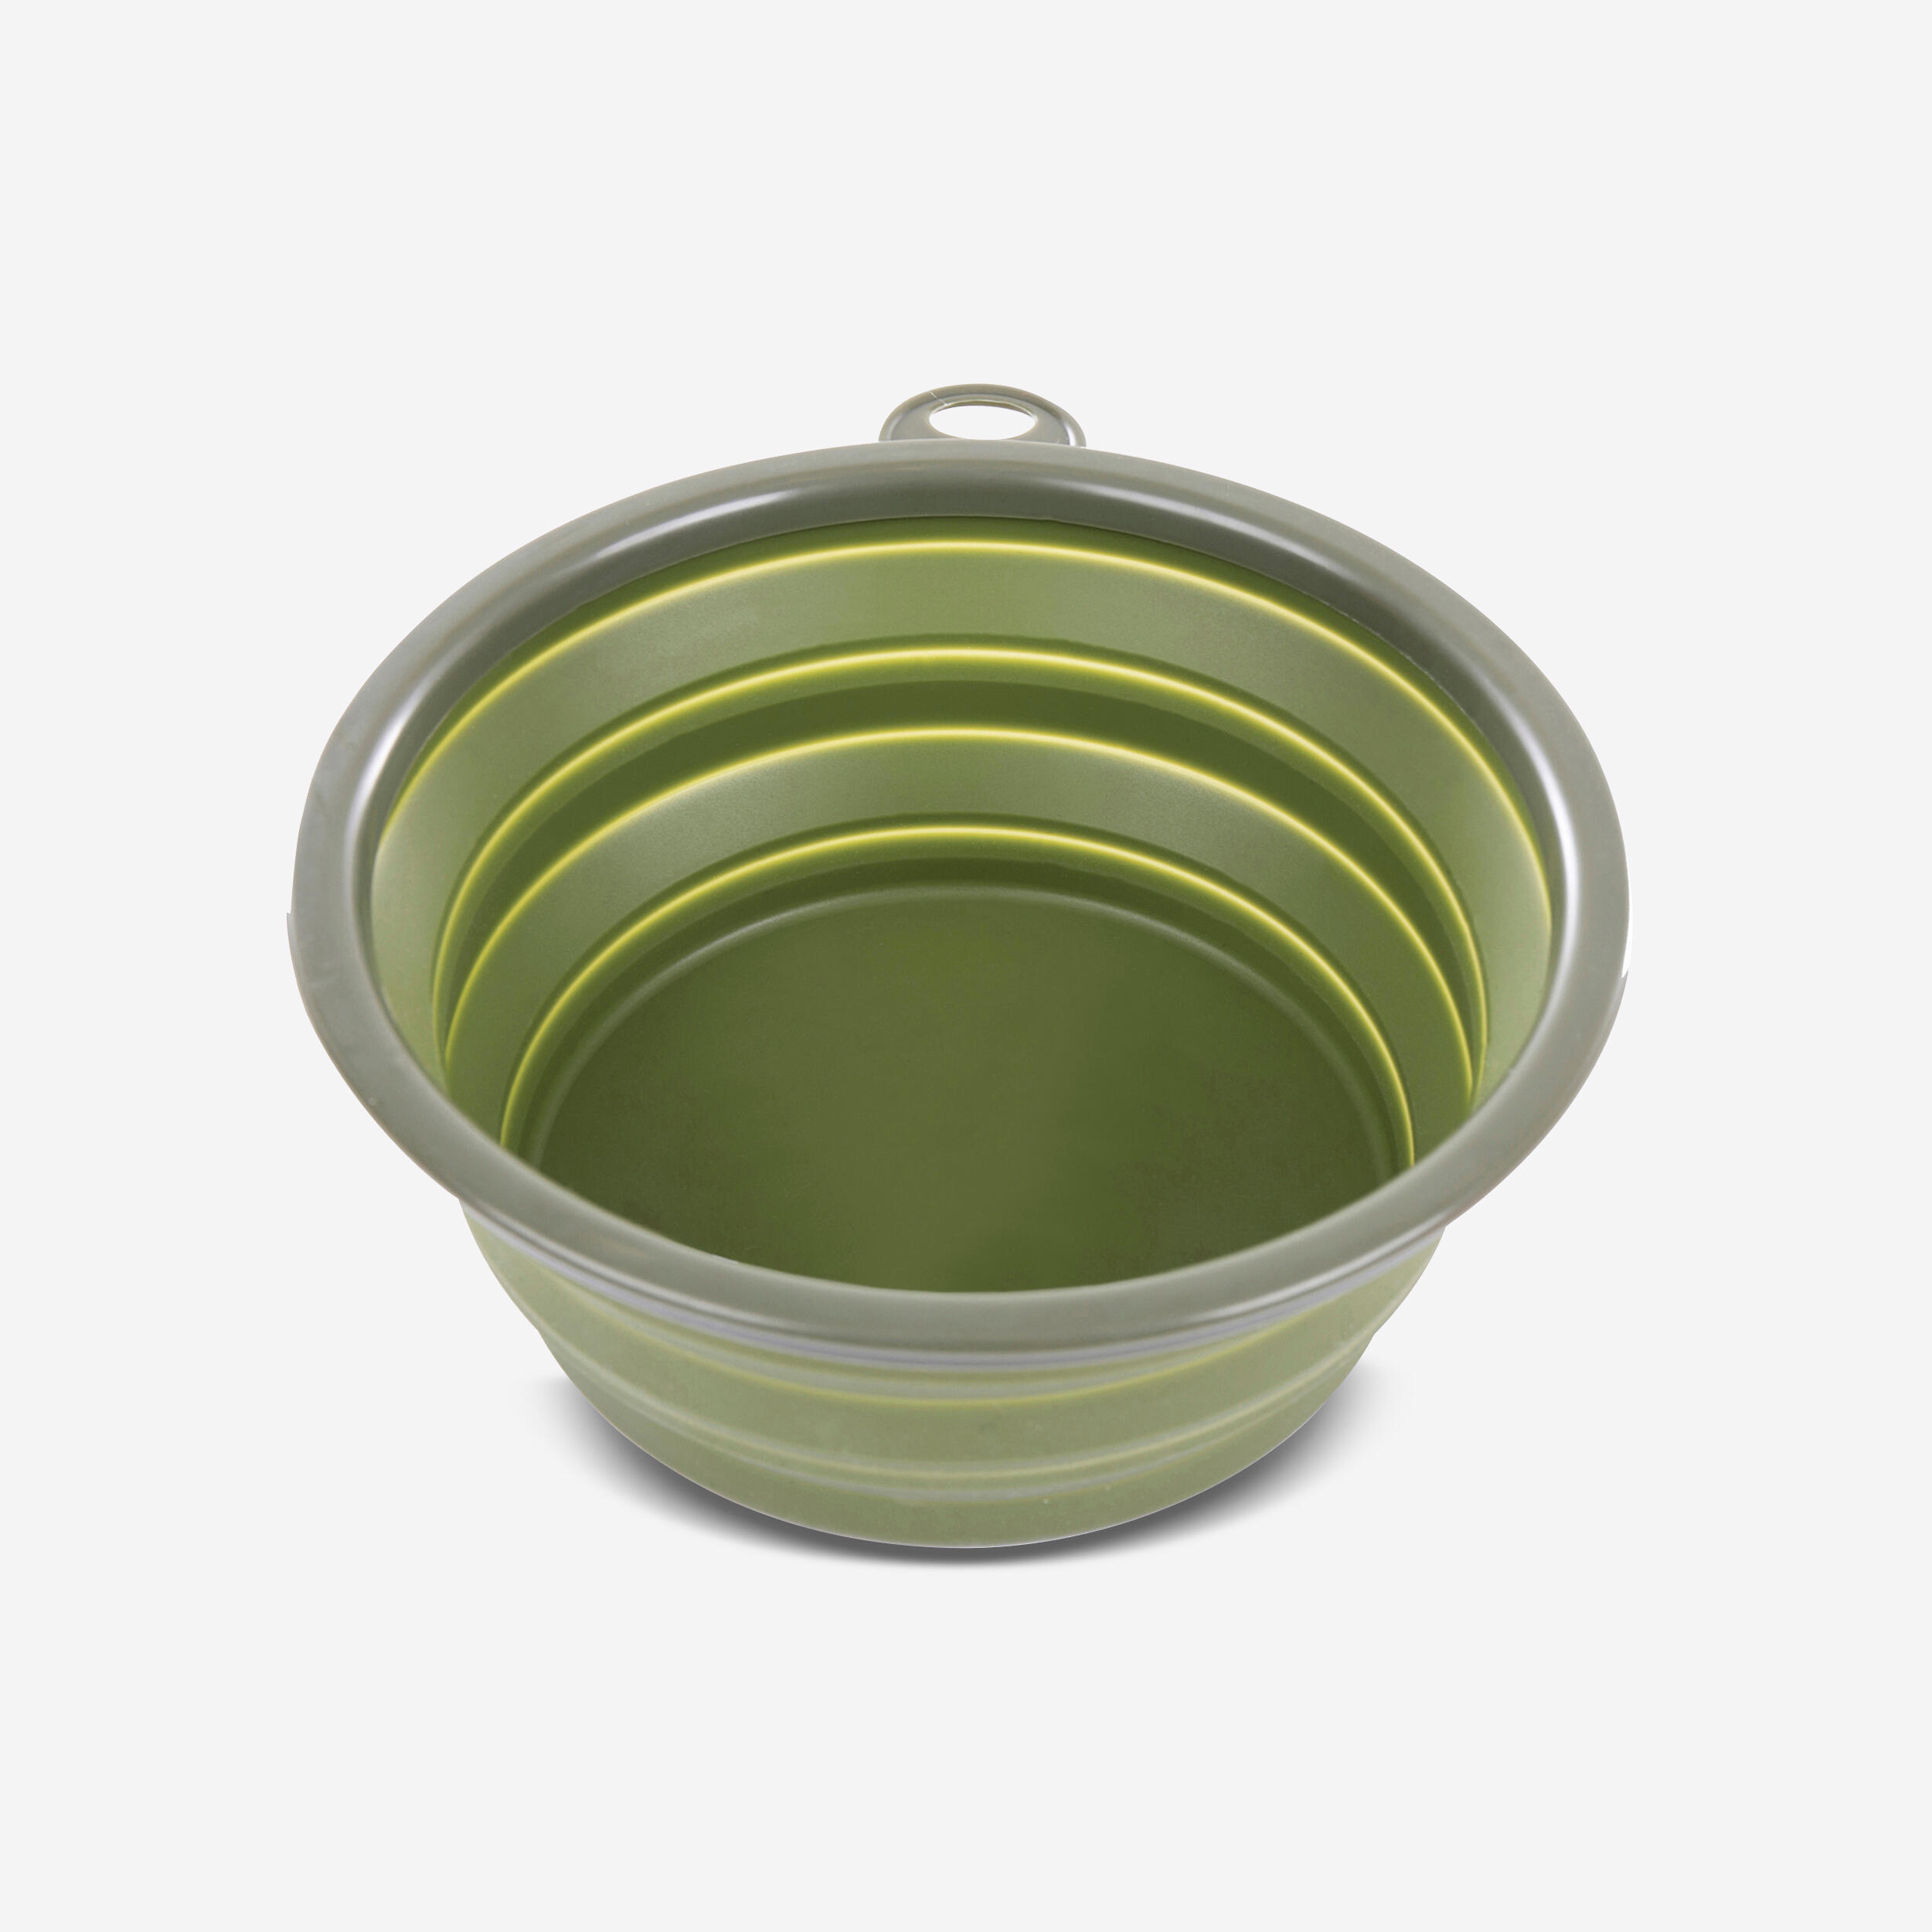 Collapsible travel bowl for dogs Khaki 1/2